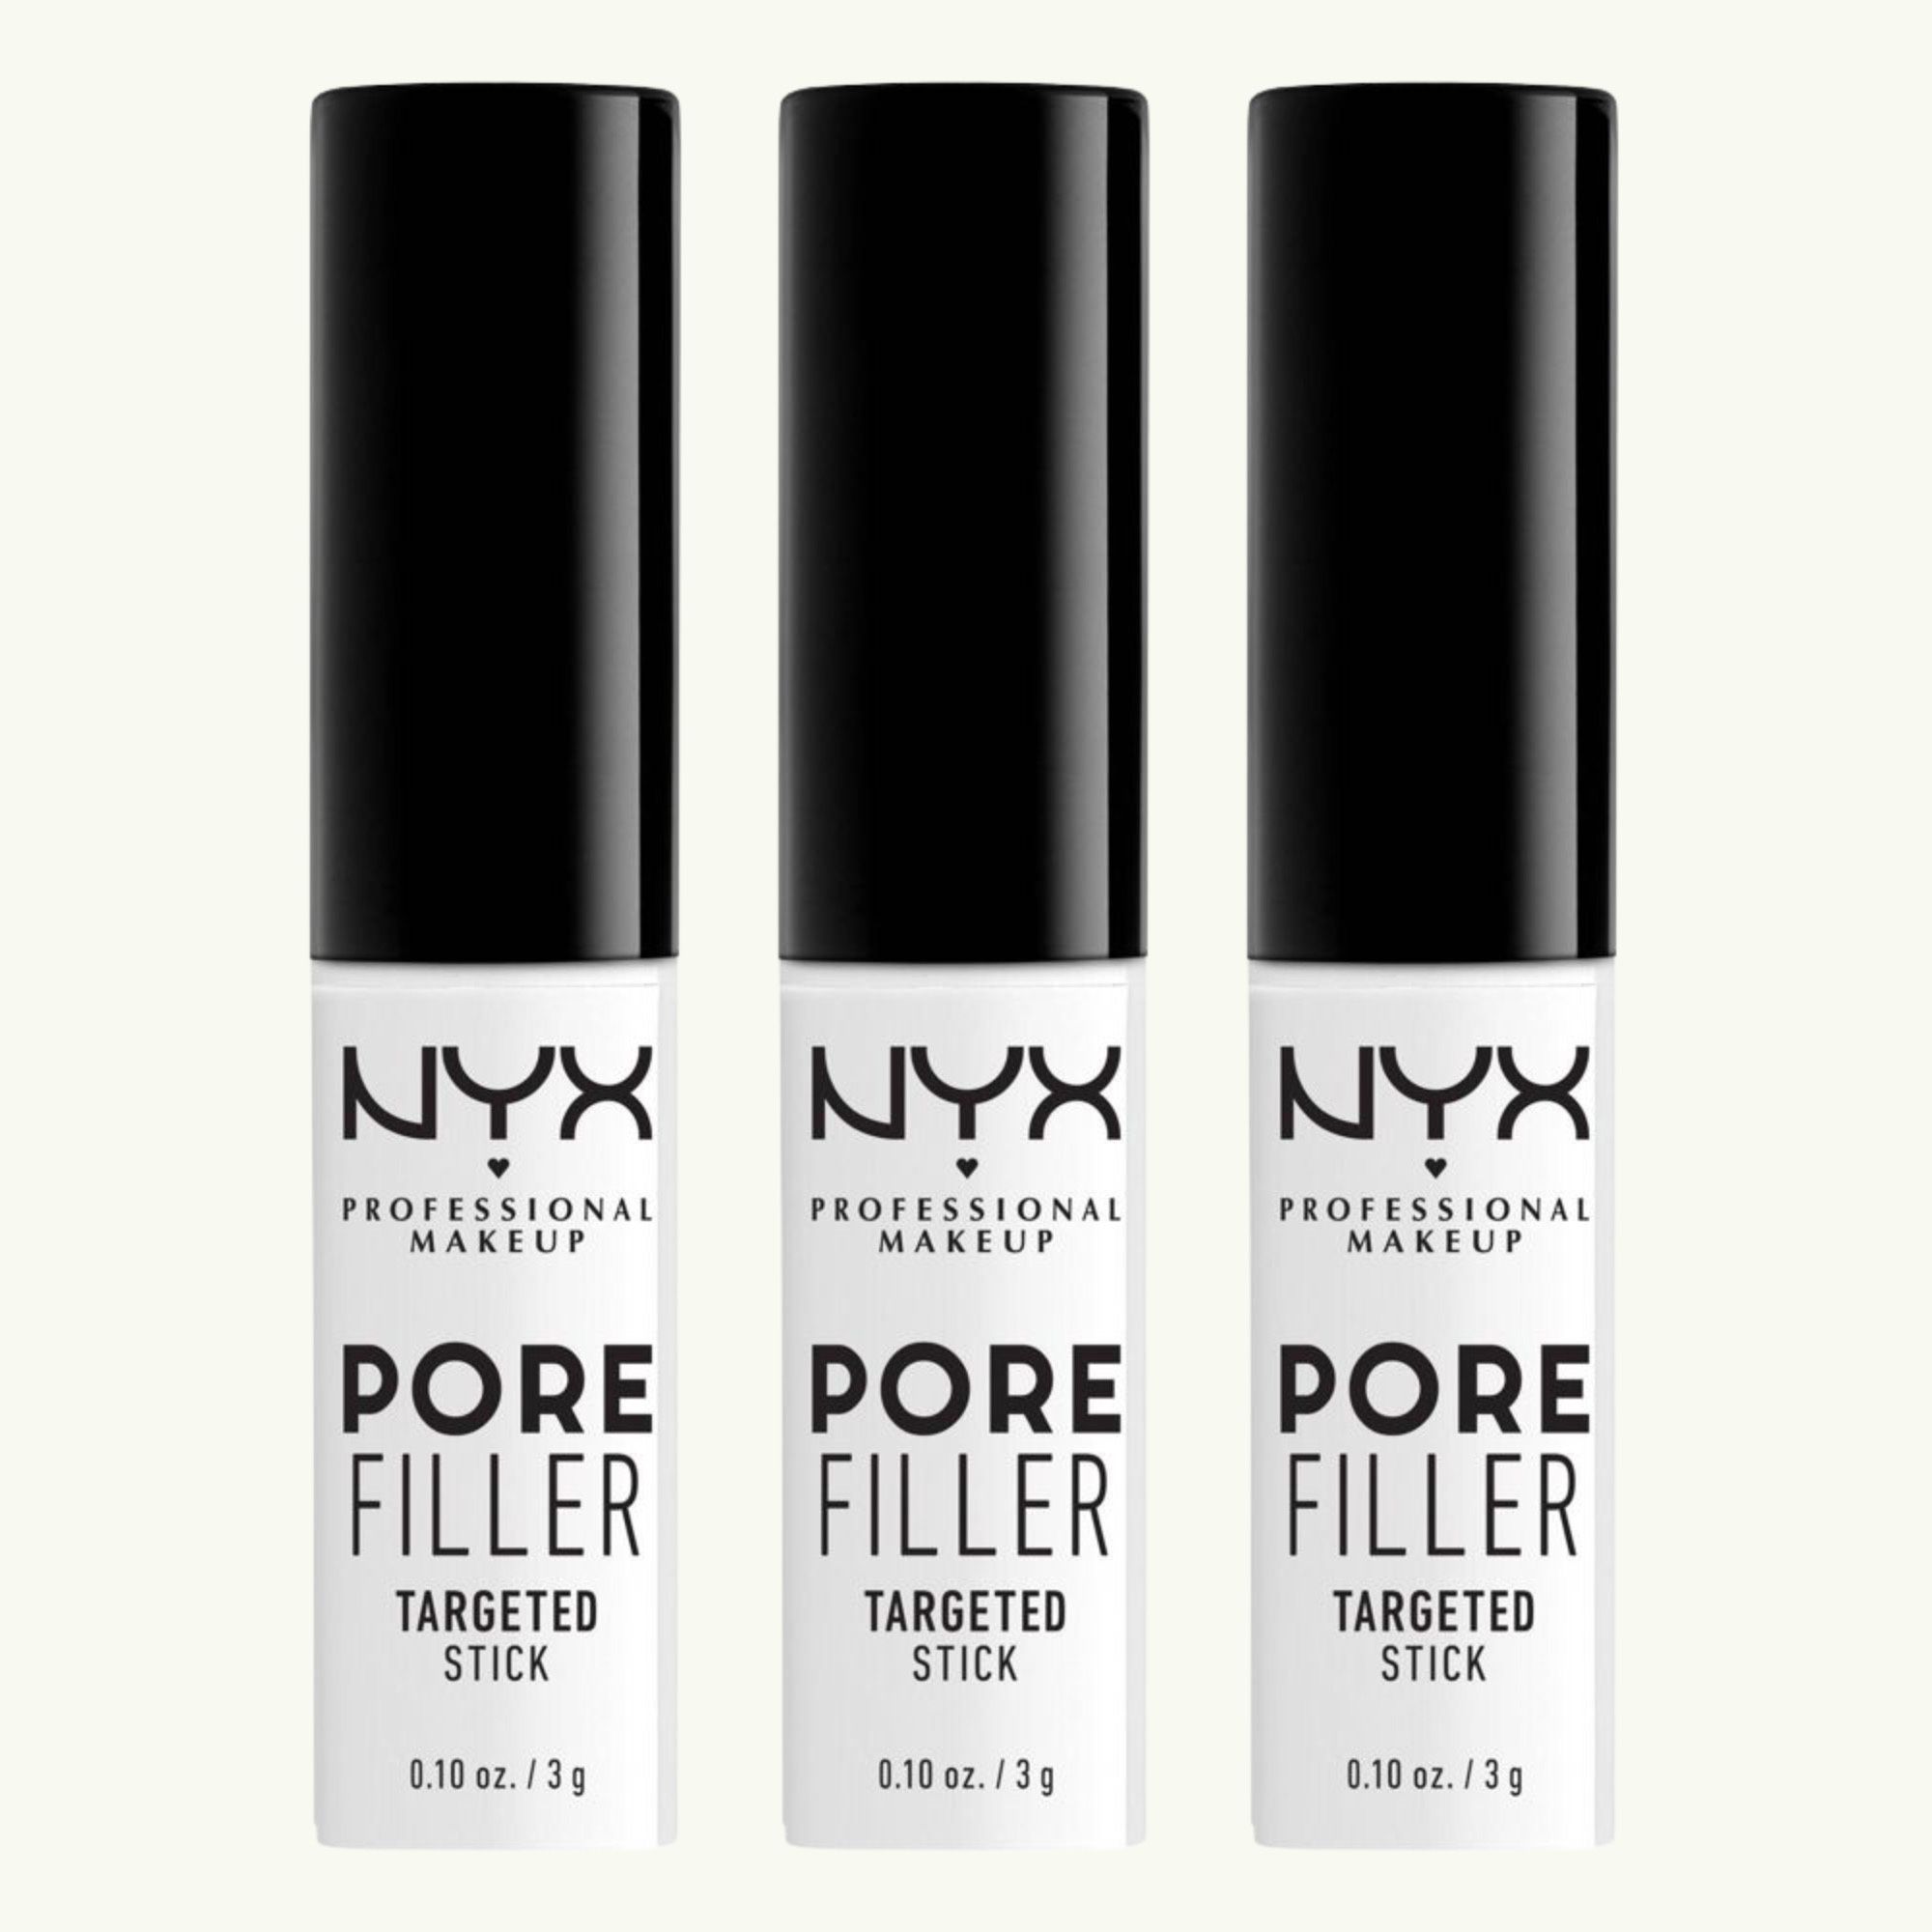 Of CA 0.1oz Multi-Stick - 3 Pore OfferUp Sale NYX - for Filler Irvine, Instant in Blurring Professional Pieces Primer Makeup